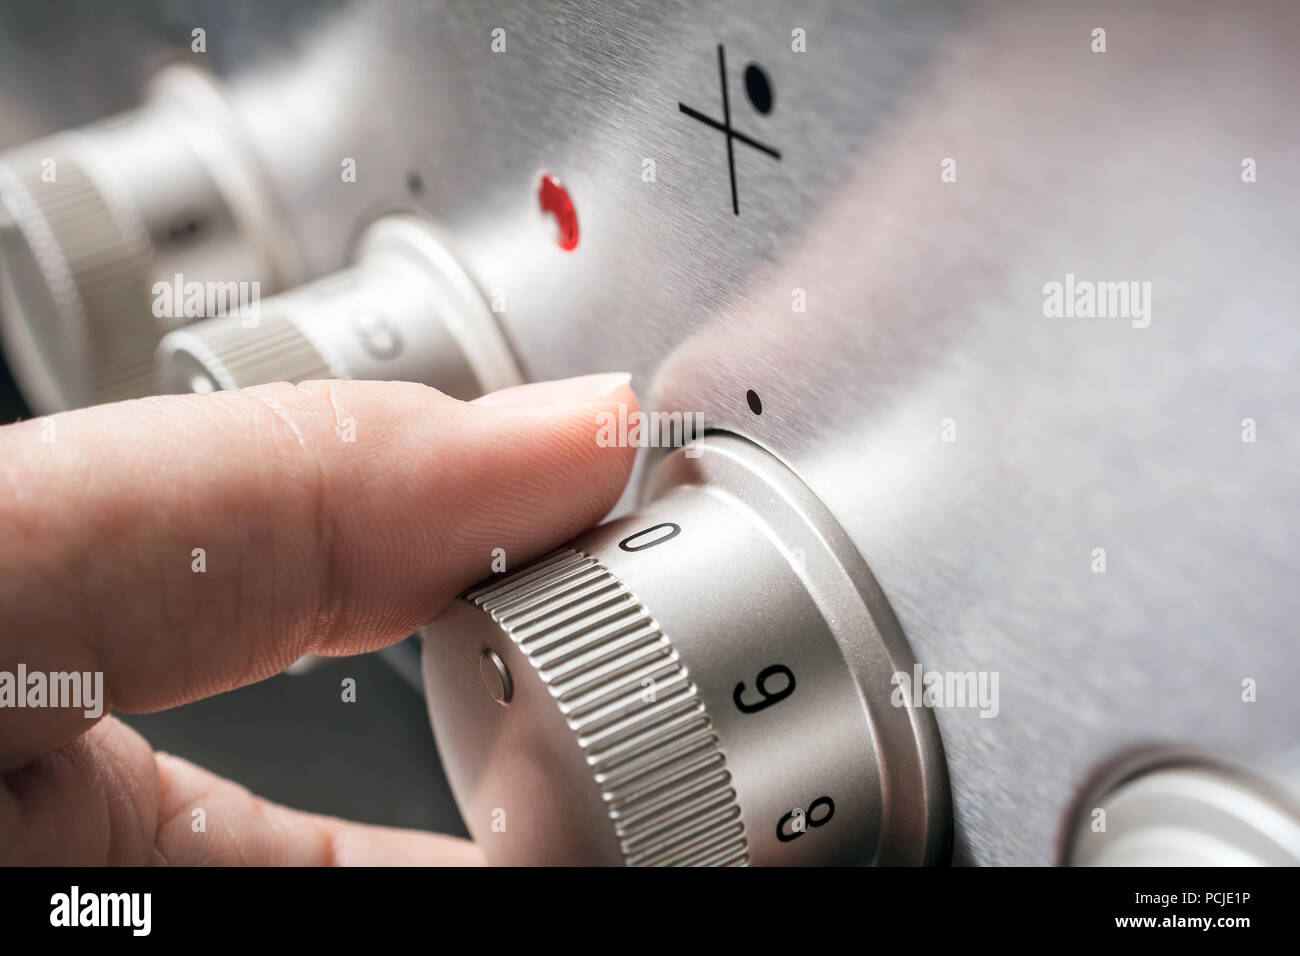 Male Hand On Stove Controls With Heat Level 0 Stock Photo